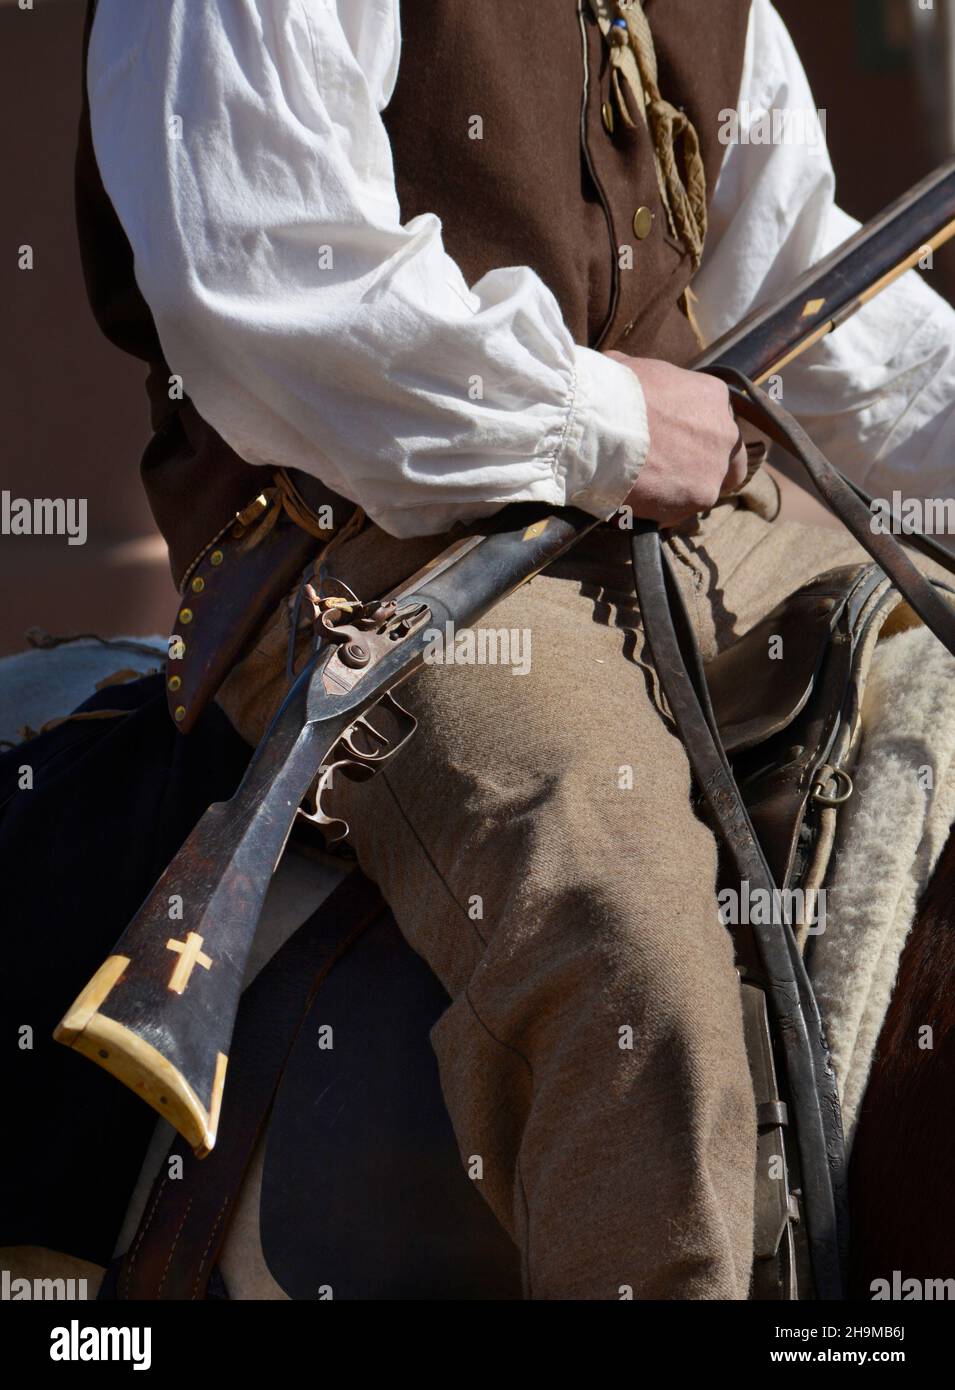 Historical reenactors in period dress present a dramatic reenactment of the 1821 opening of the Santa Fe Trail in Santa Fe, New Mexico. Stock Photo